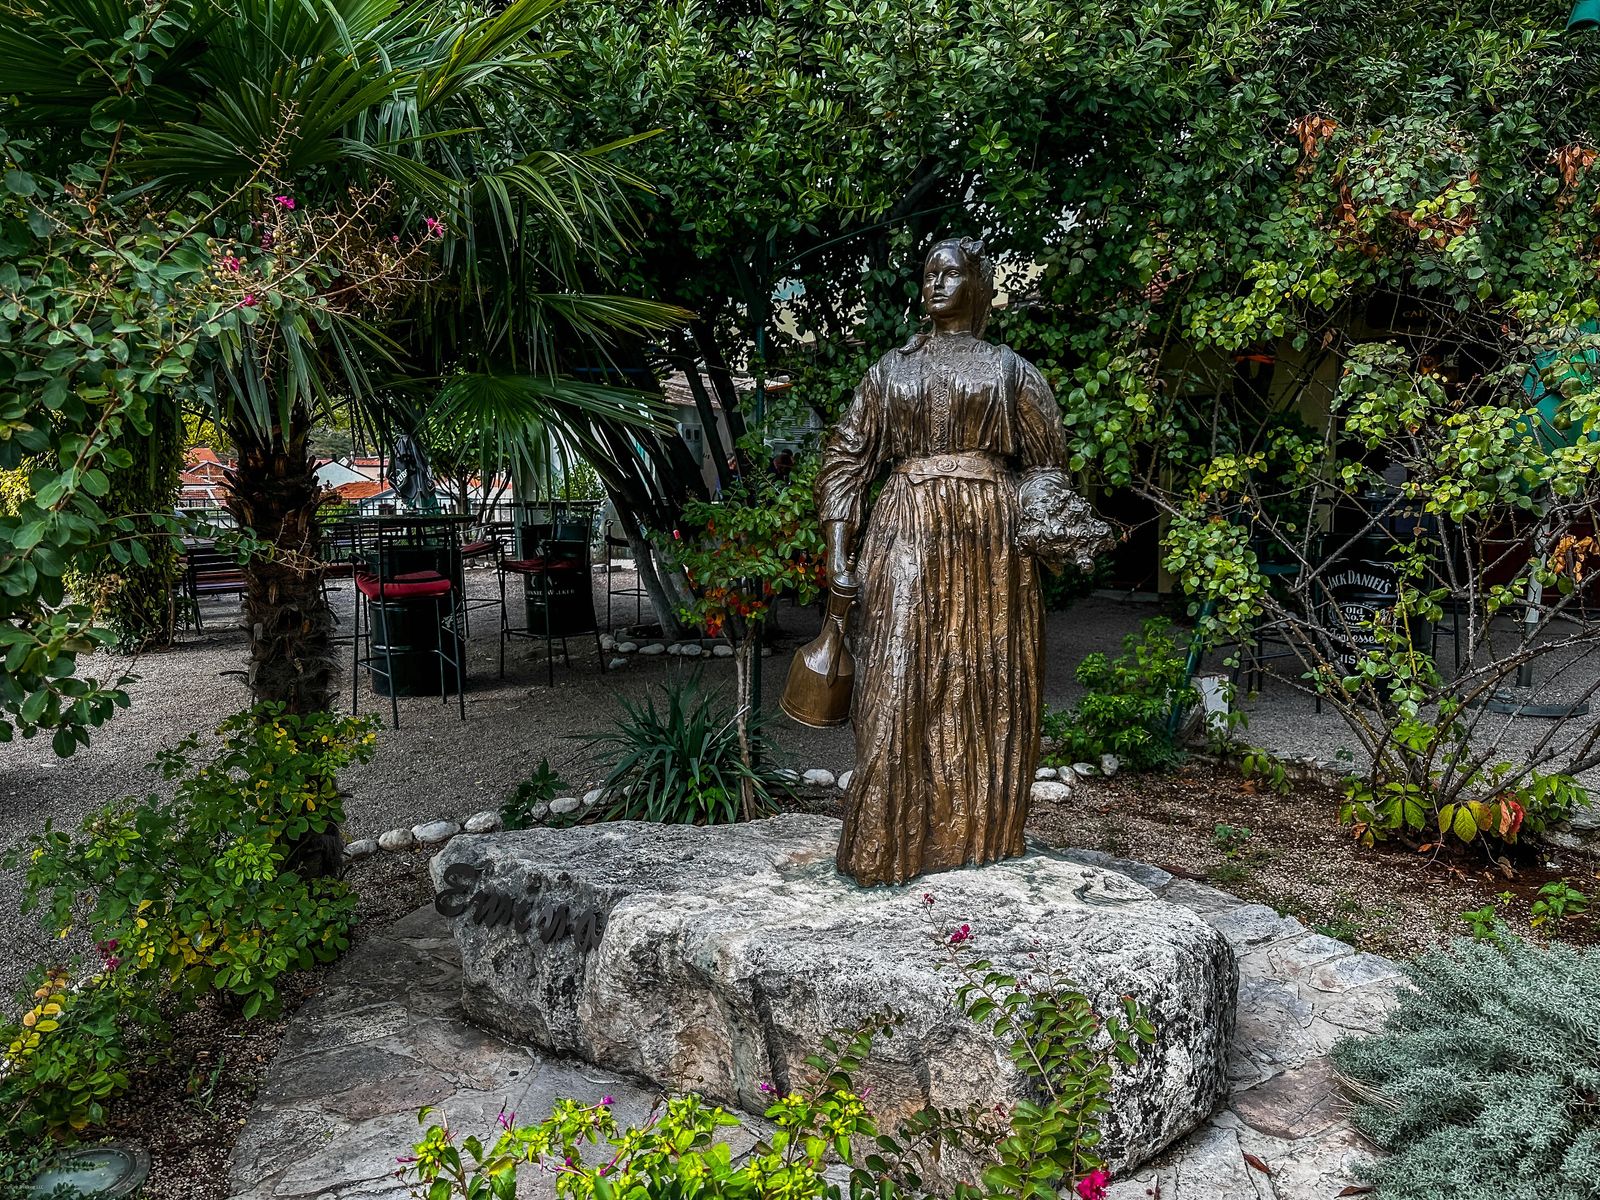 One Day In Mostar Bosnia - Statue of Woman